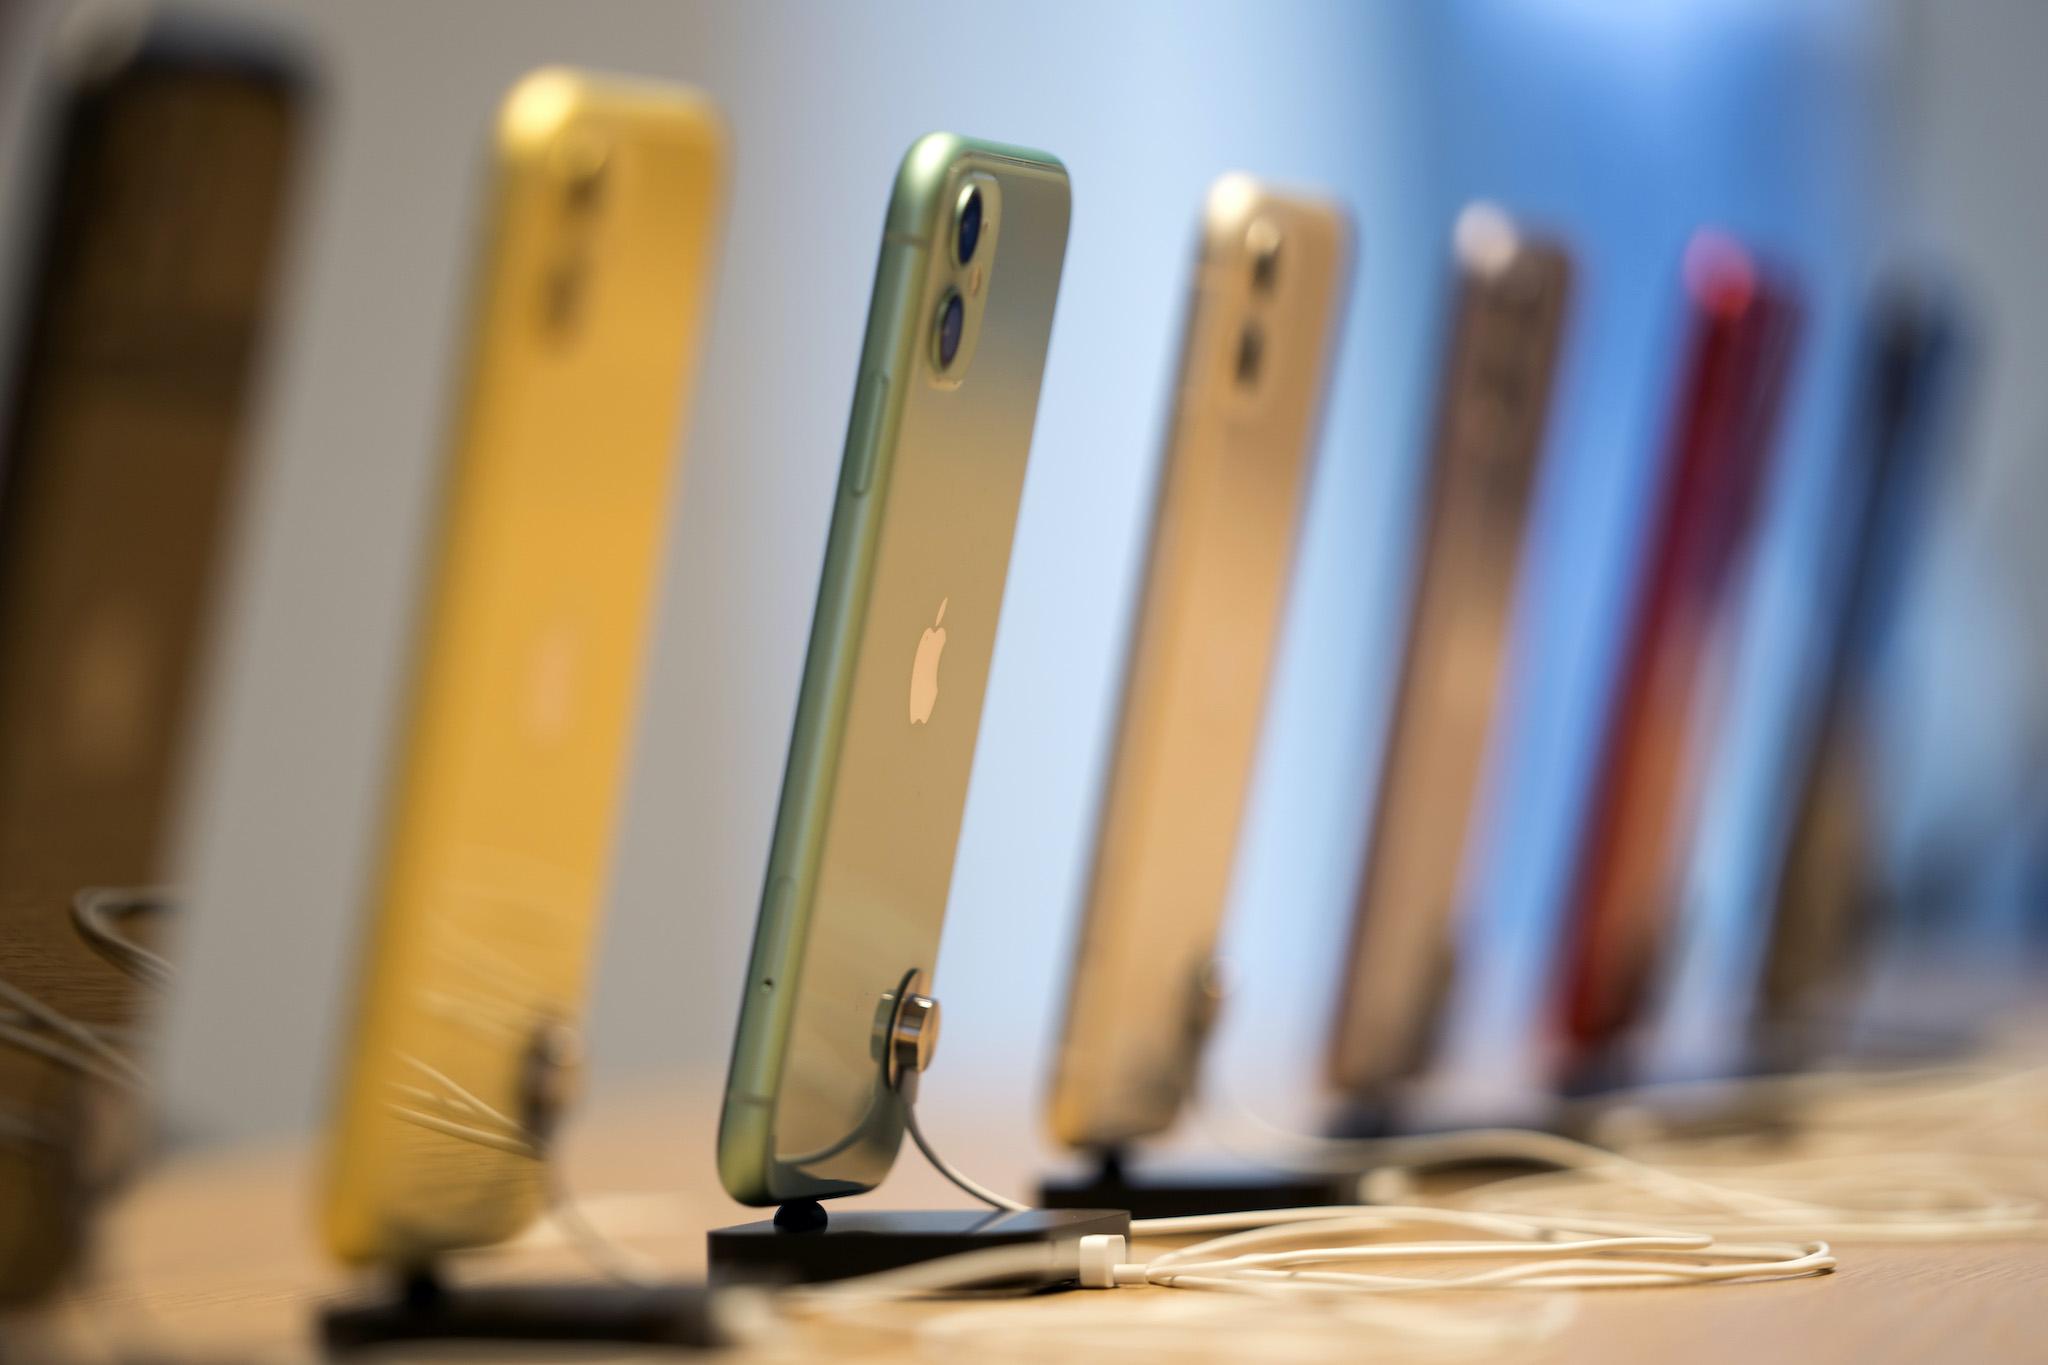 Apple Inc.'s iPhone 11, iPhone11 Pro and iPhone 11 Pro Max smartphones are displayed in the Apple Marunouchi store on September 20, 2019 in Tokyo, Japan